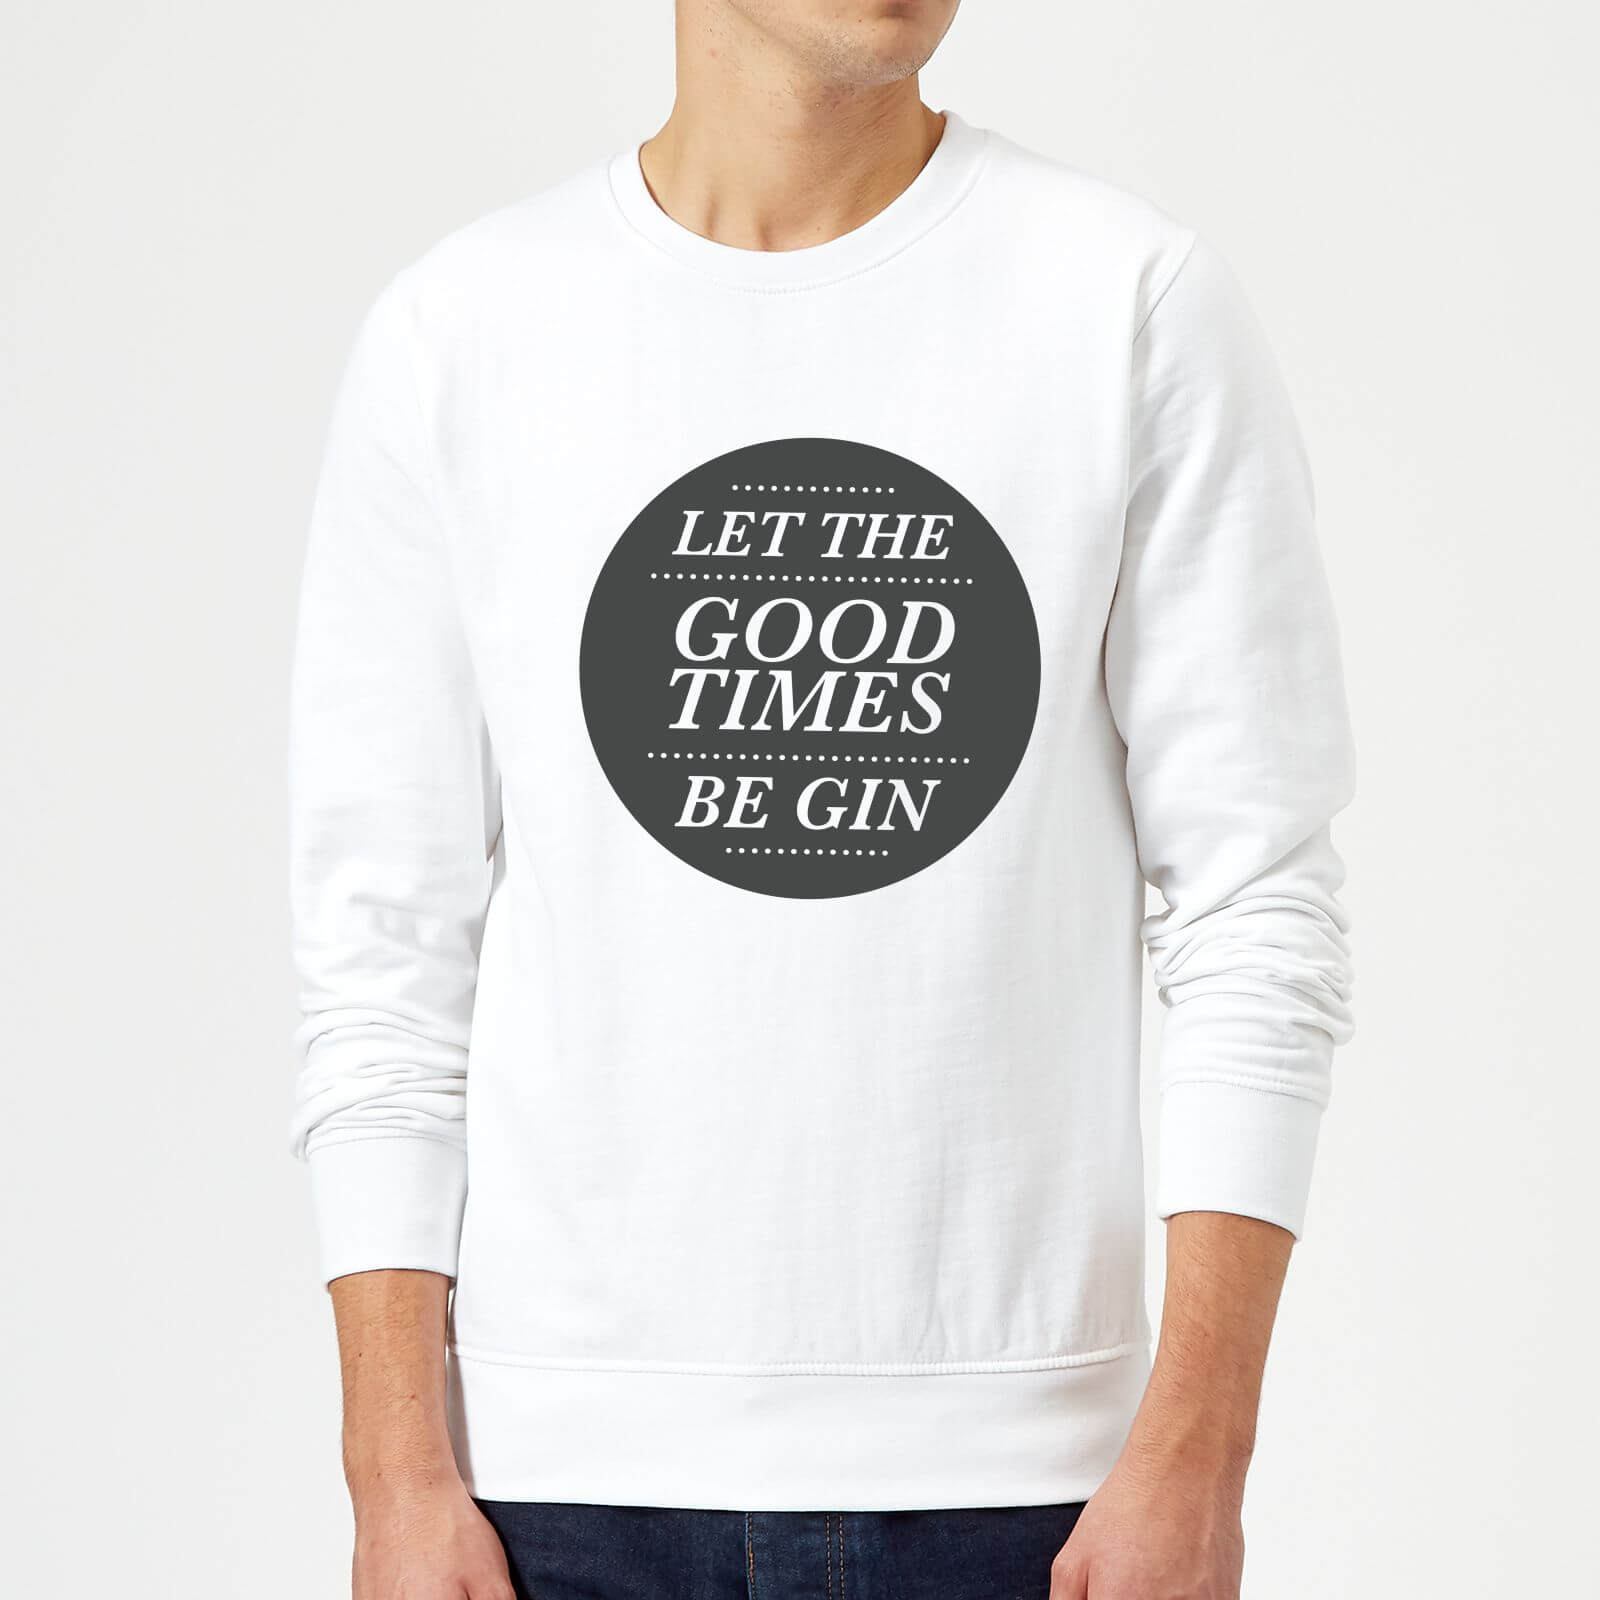 Let the Good Times Be Gin Sweatshirt - White - M - White